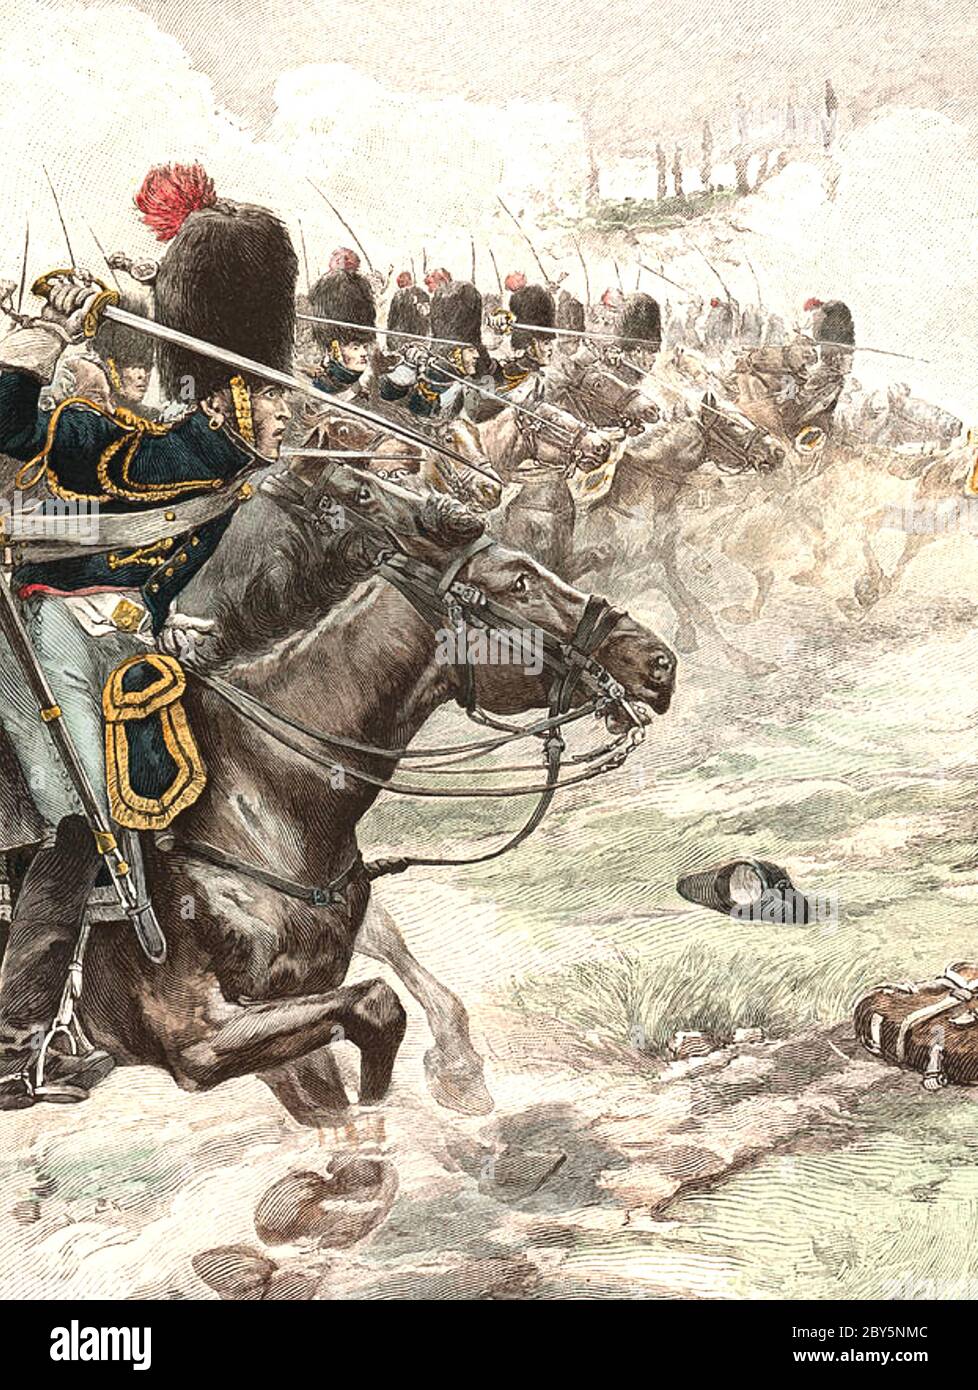 BATTLE OF MARENGO 14 June 1800 near Alessandria in Piedmont, Italy. General François Kellermann's French cavalry charging the Austrians. Stock Photo